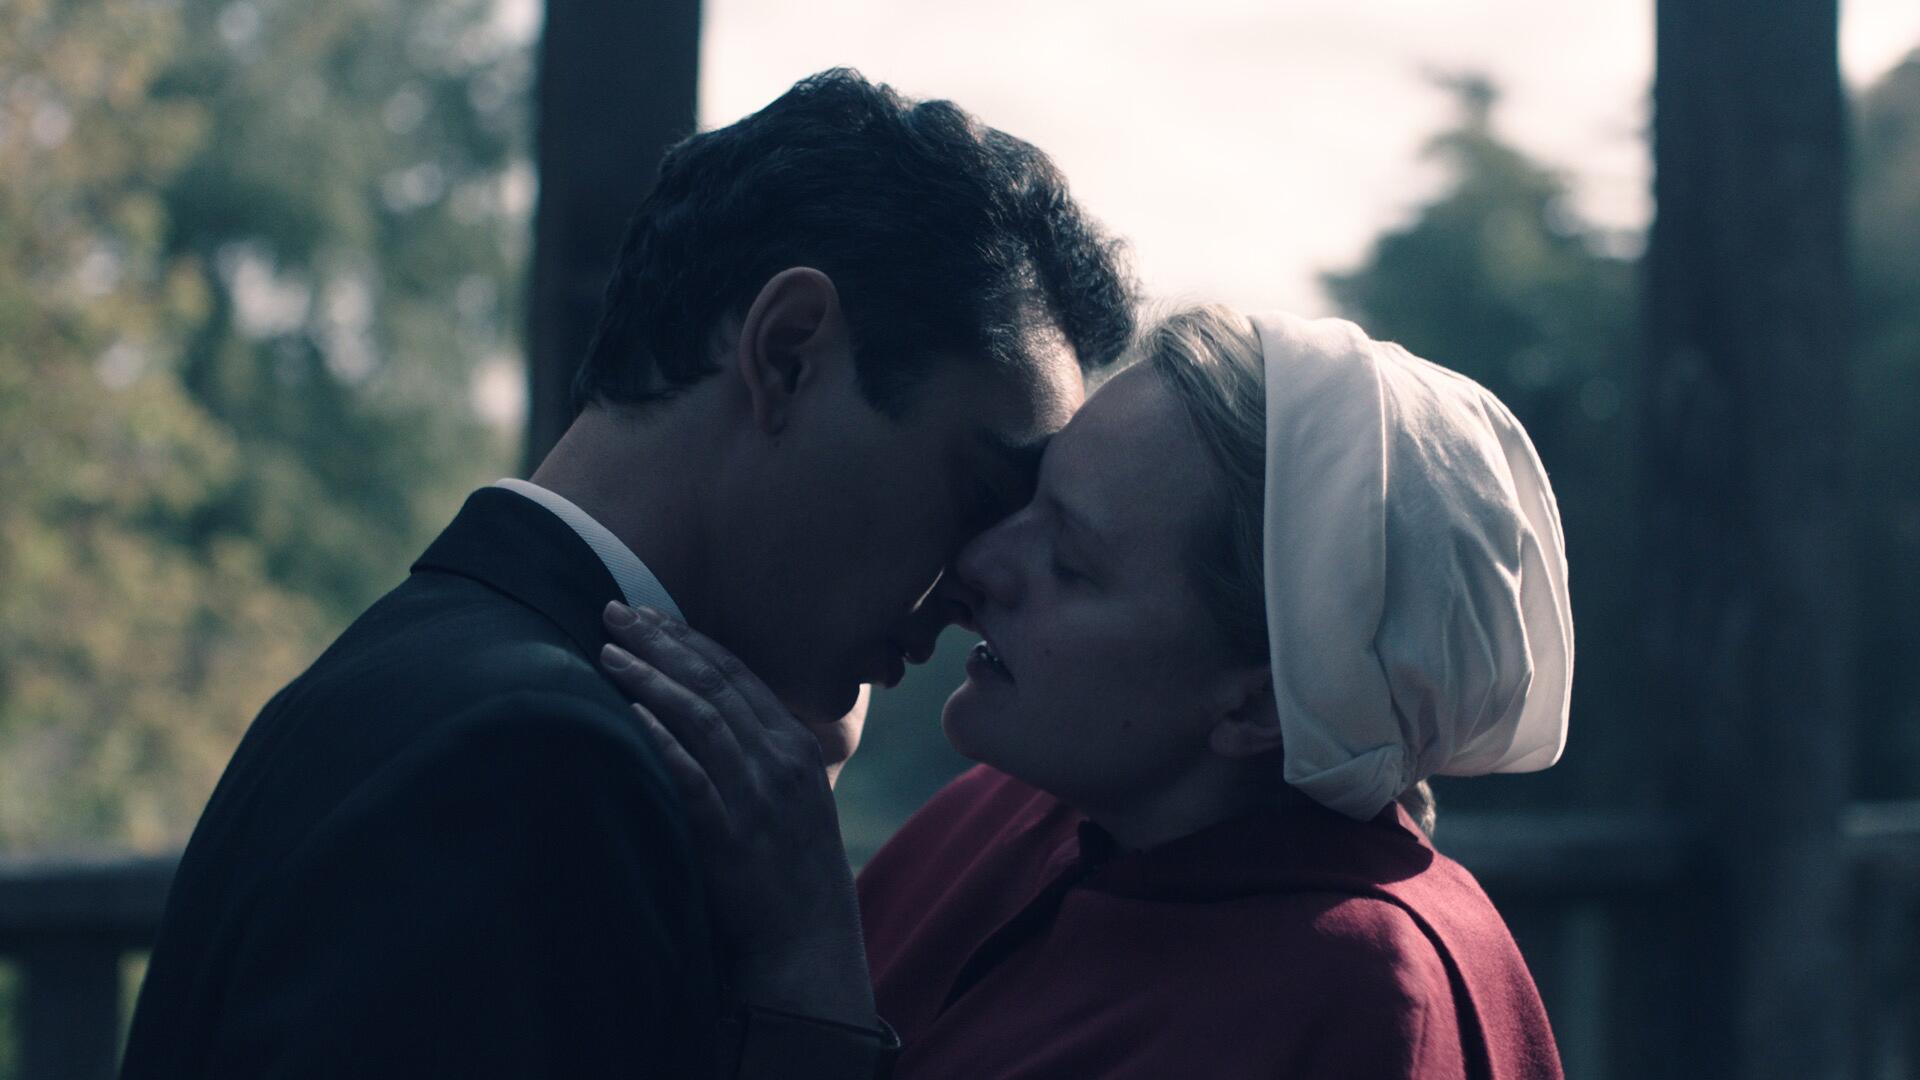 Max Minghella and Elisabeth Moss in season 4 episode 3 of 'The Handmaid's Tale'